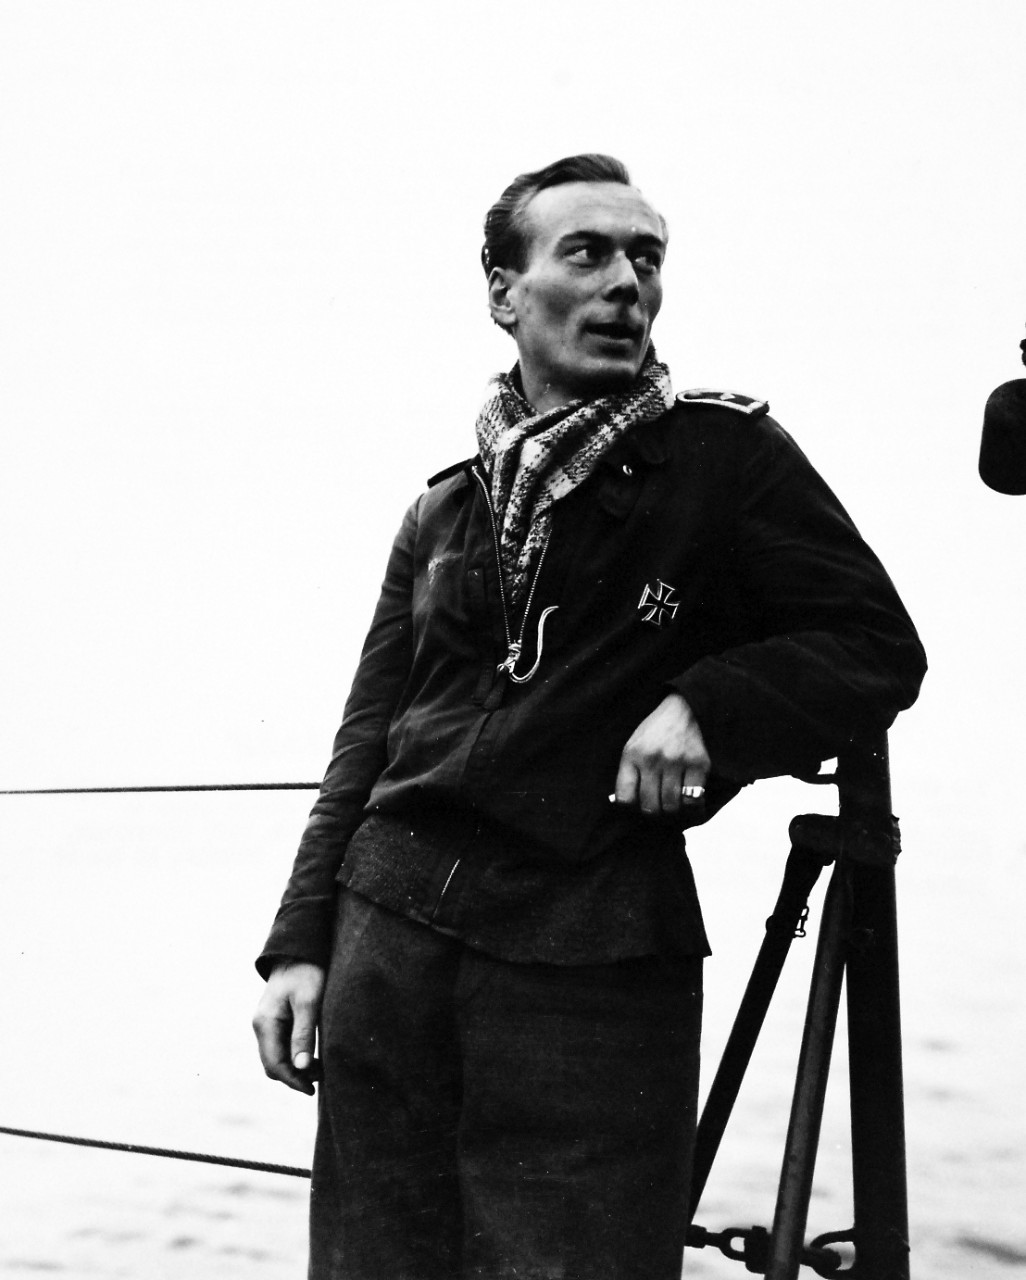 80-G-54414:   Battle of Anzio, January-June 1944.   German Prisoners at the Anzio Beachhead below Rome, on their way to prison camp.  Sporting an Iron Cross on his jacket, this Nazi prisoner of war poses for a camera study onboard the LST bearing him to a behind-the-lines prison camp.  A veteran of 260 missions in less than 2 years, this English-speaking fighter pilot is 27 years old – he still believed in the ultimate Nazi victory.  Photograph released February 17, 1944.  Official U.S. Navy photograph, now in the collections of the National Archives.  (2016/06/28).